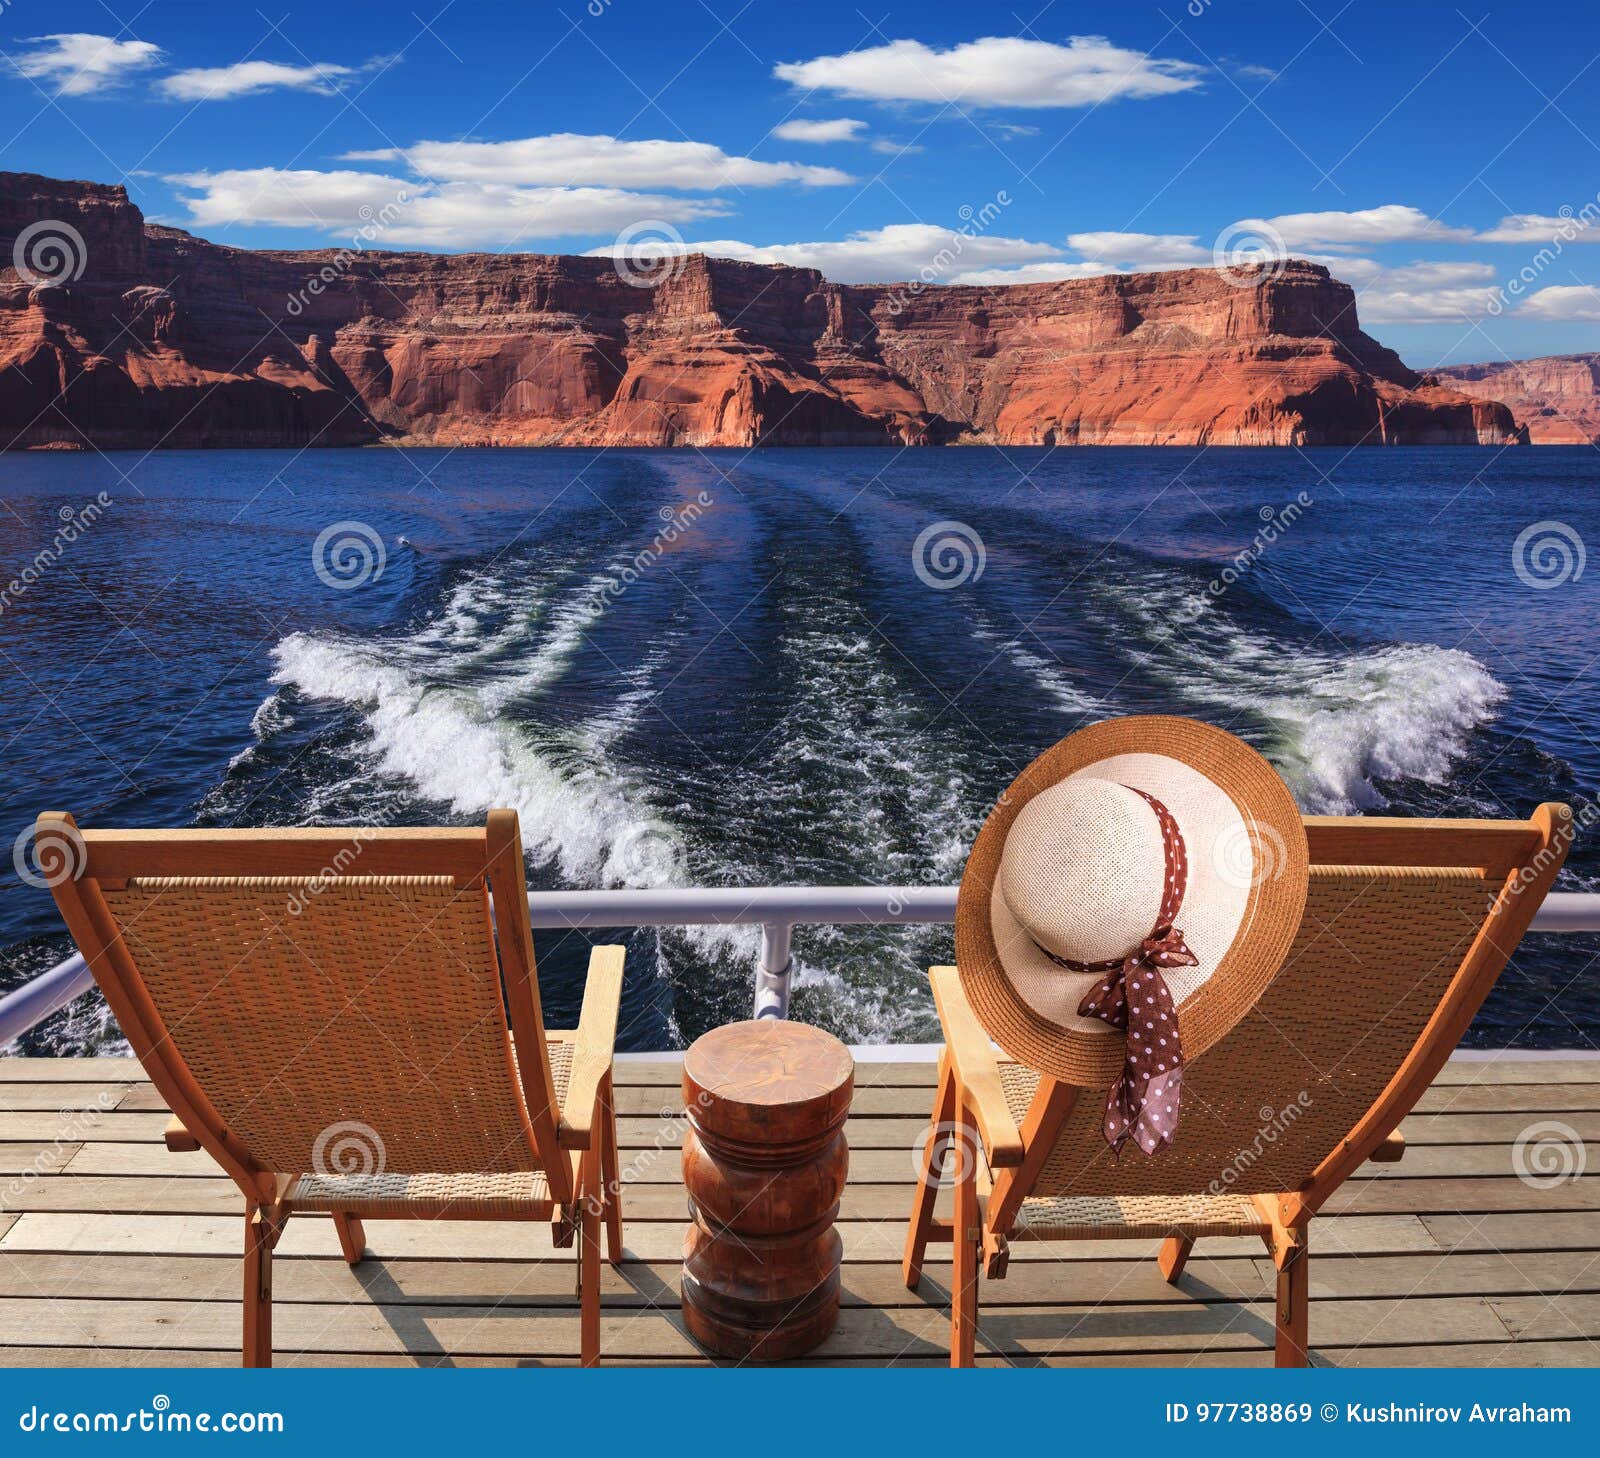 The Two Deck Chairs Stock Image Image Of Rock Deck 97738869